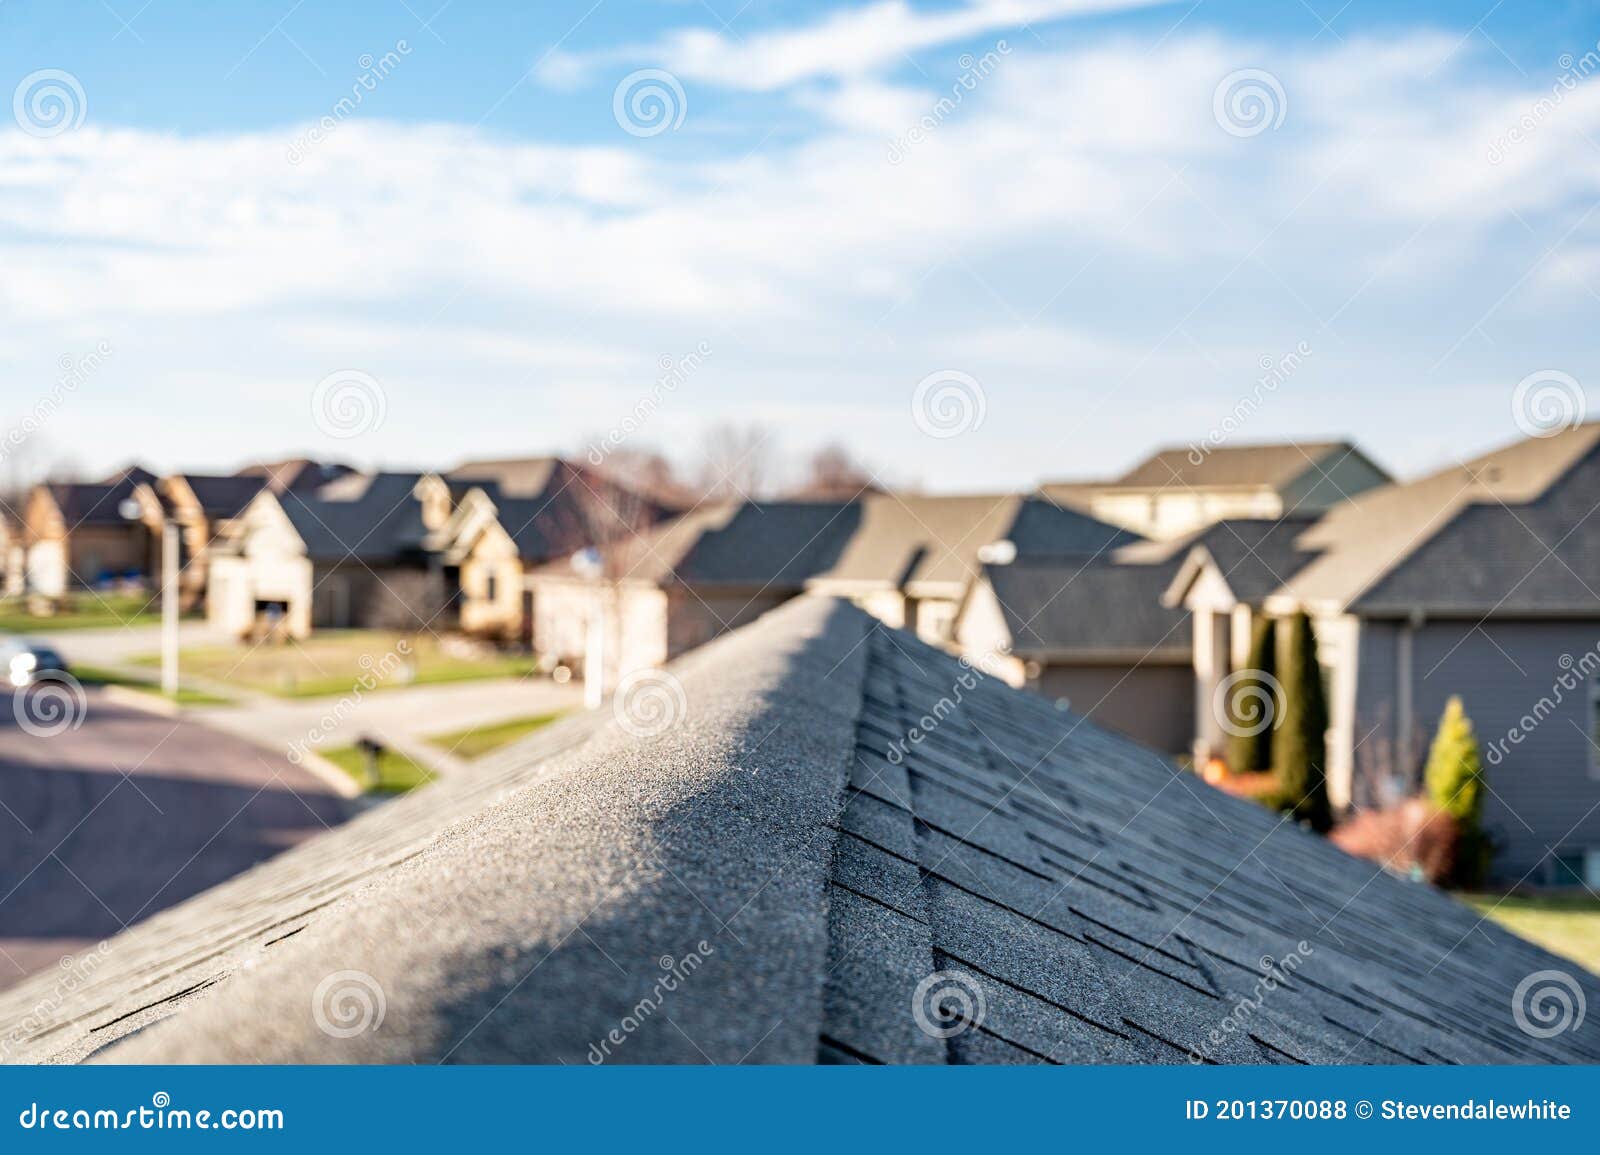 view down the top of an asphalt shingle roof with ridge cap